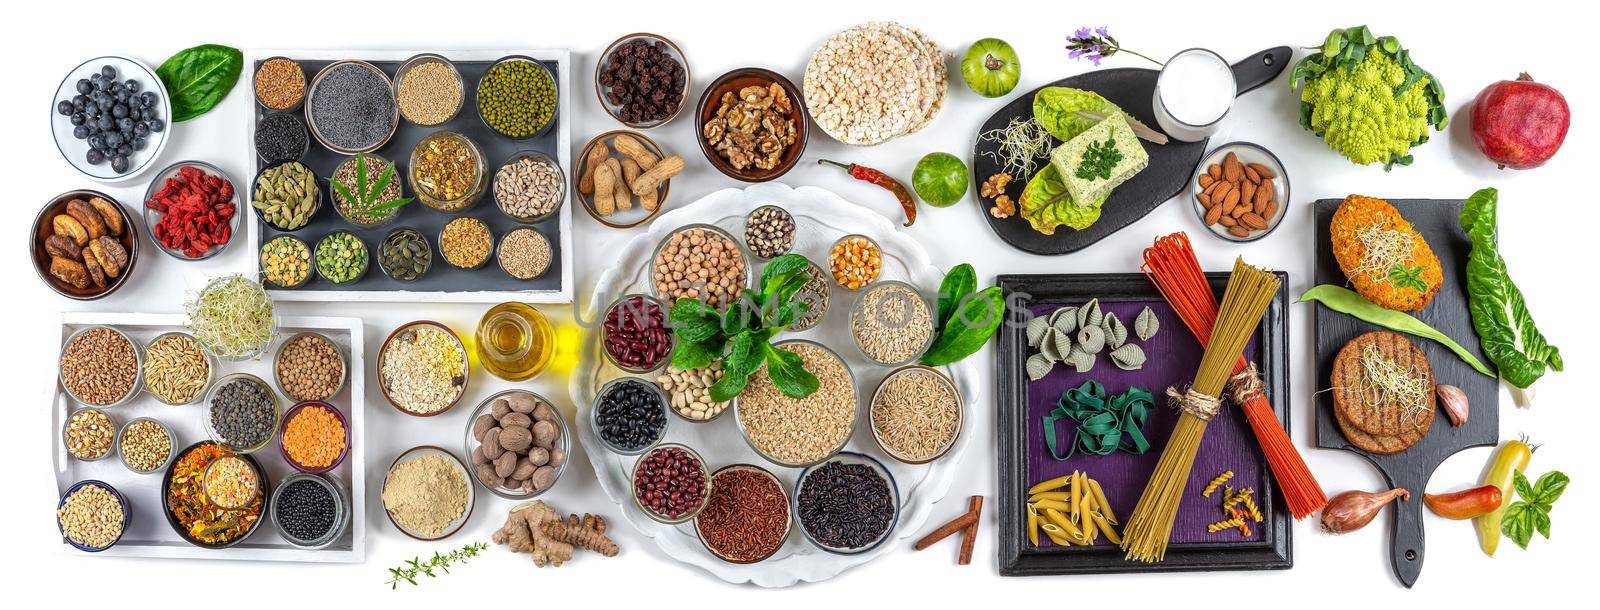 Panoramic on the essentials of vegan food - top view on a white background